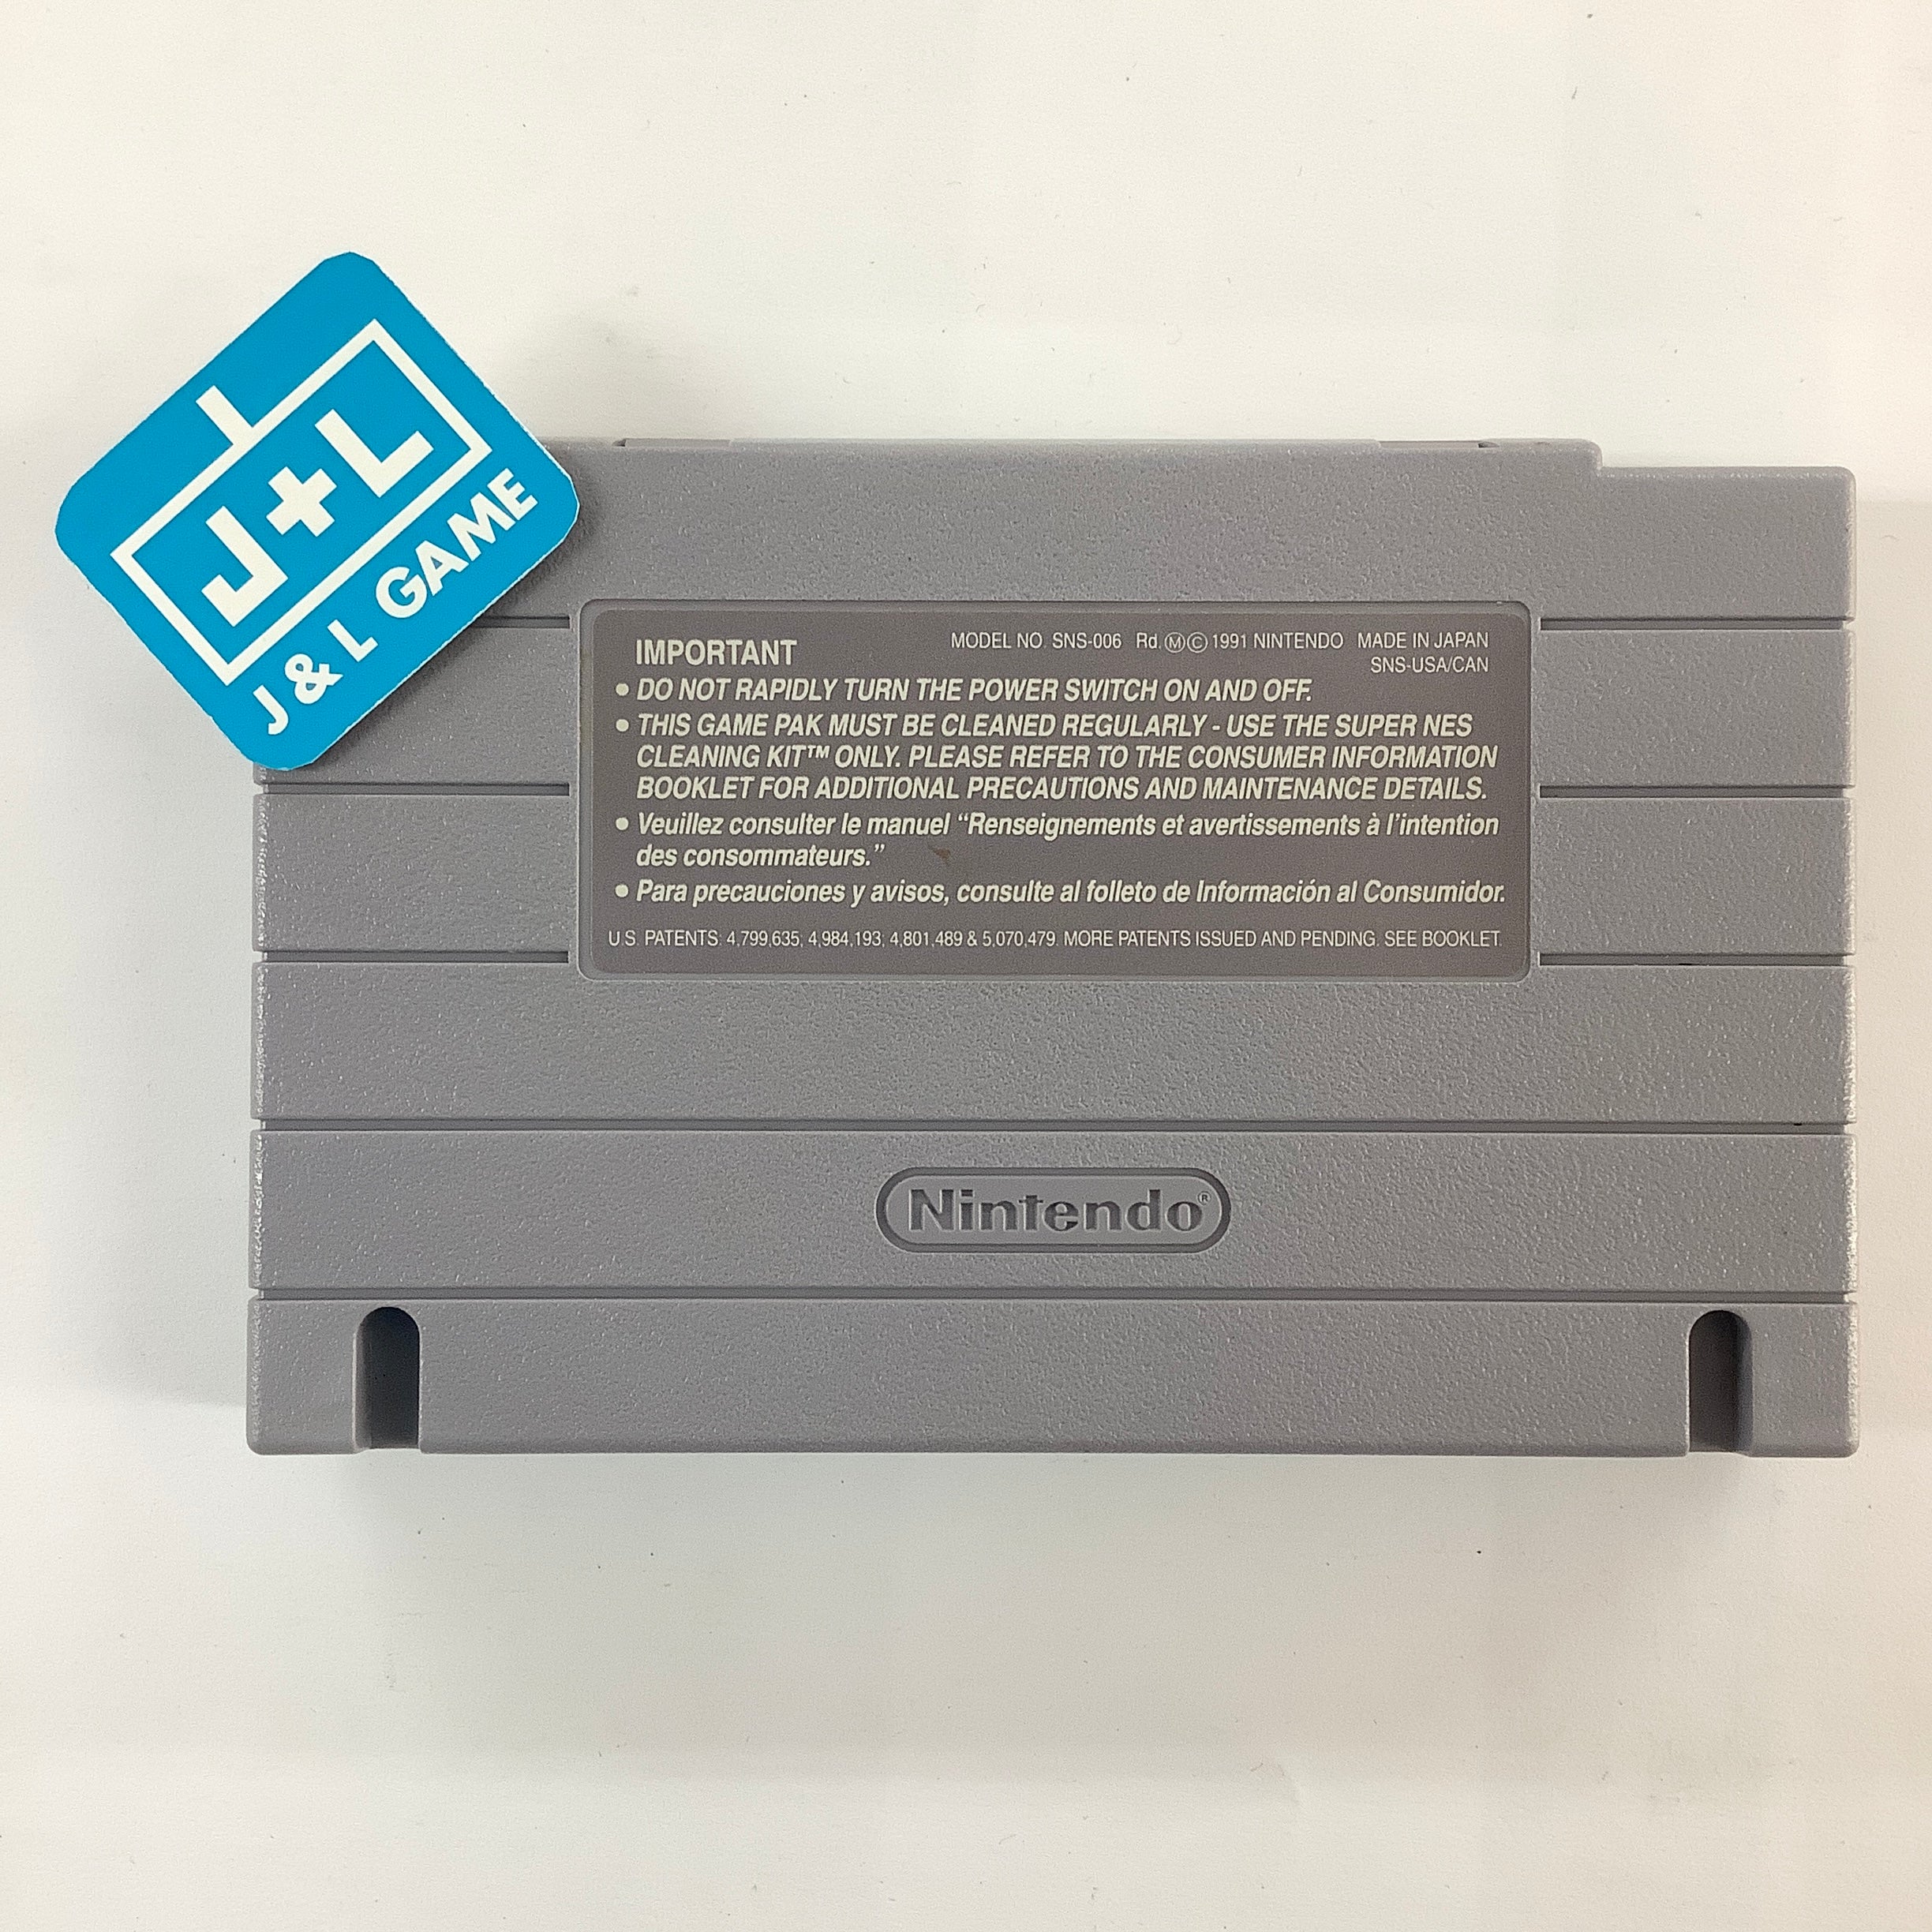 Hit the Ice - (SNES) Super Nintendo [Pre-Owned] Video Games Taito Corporation   